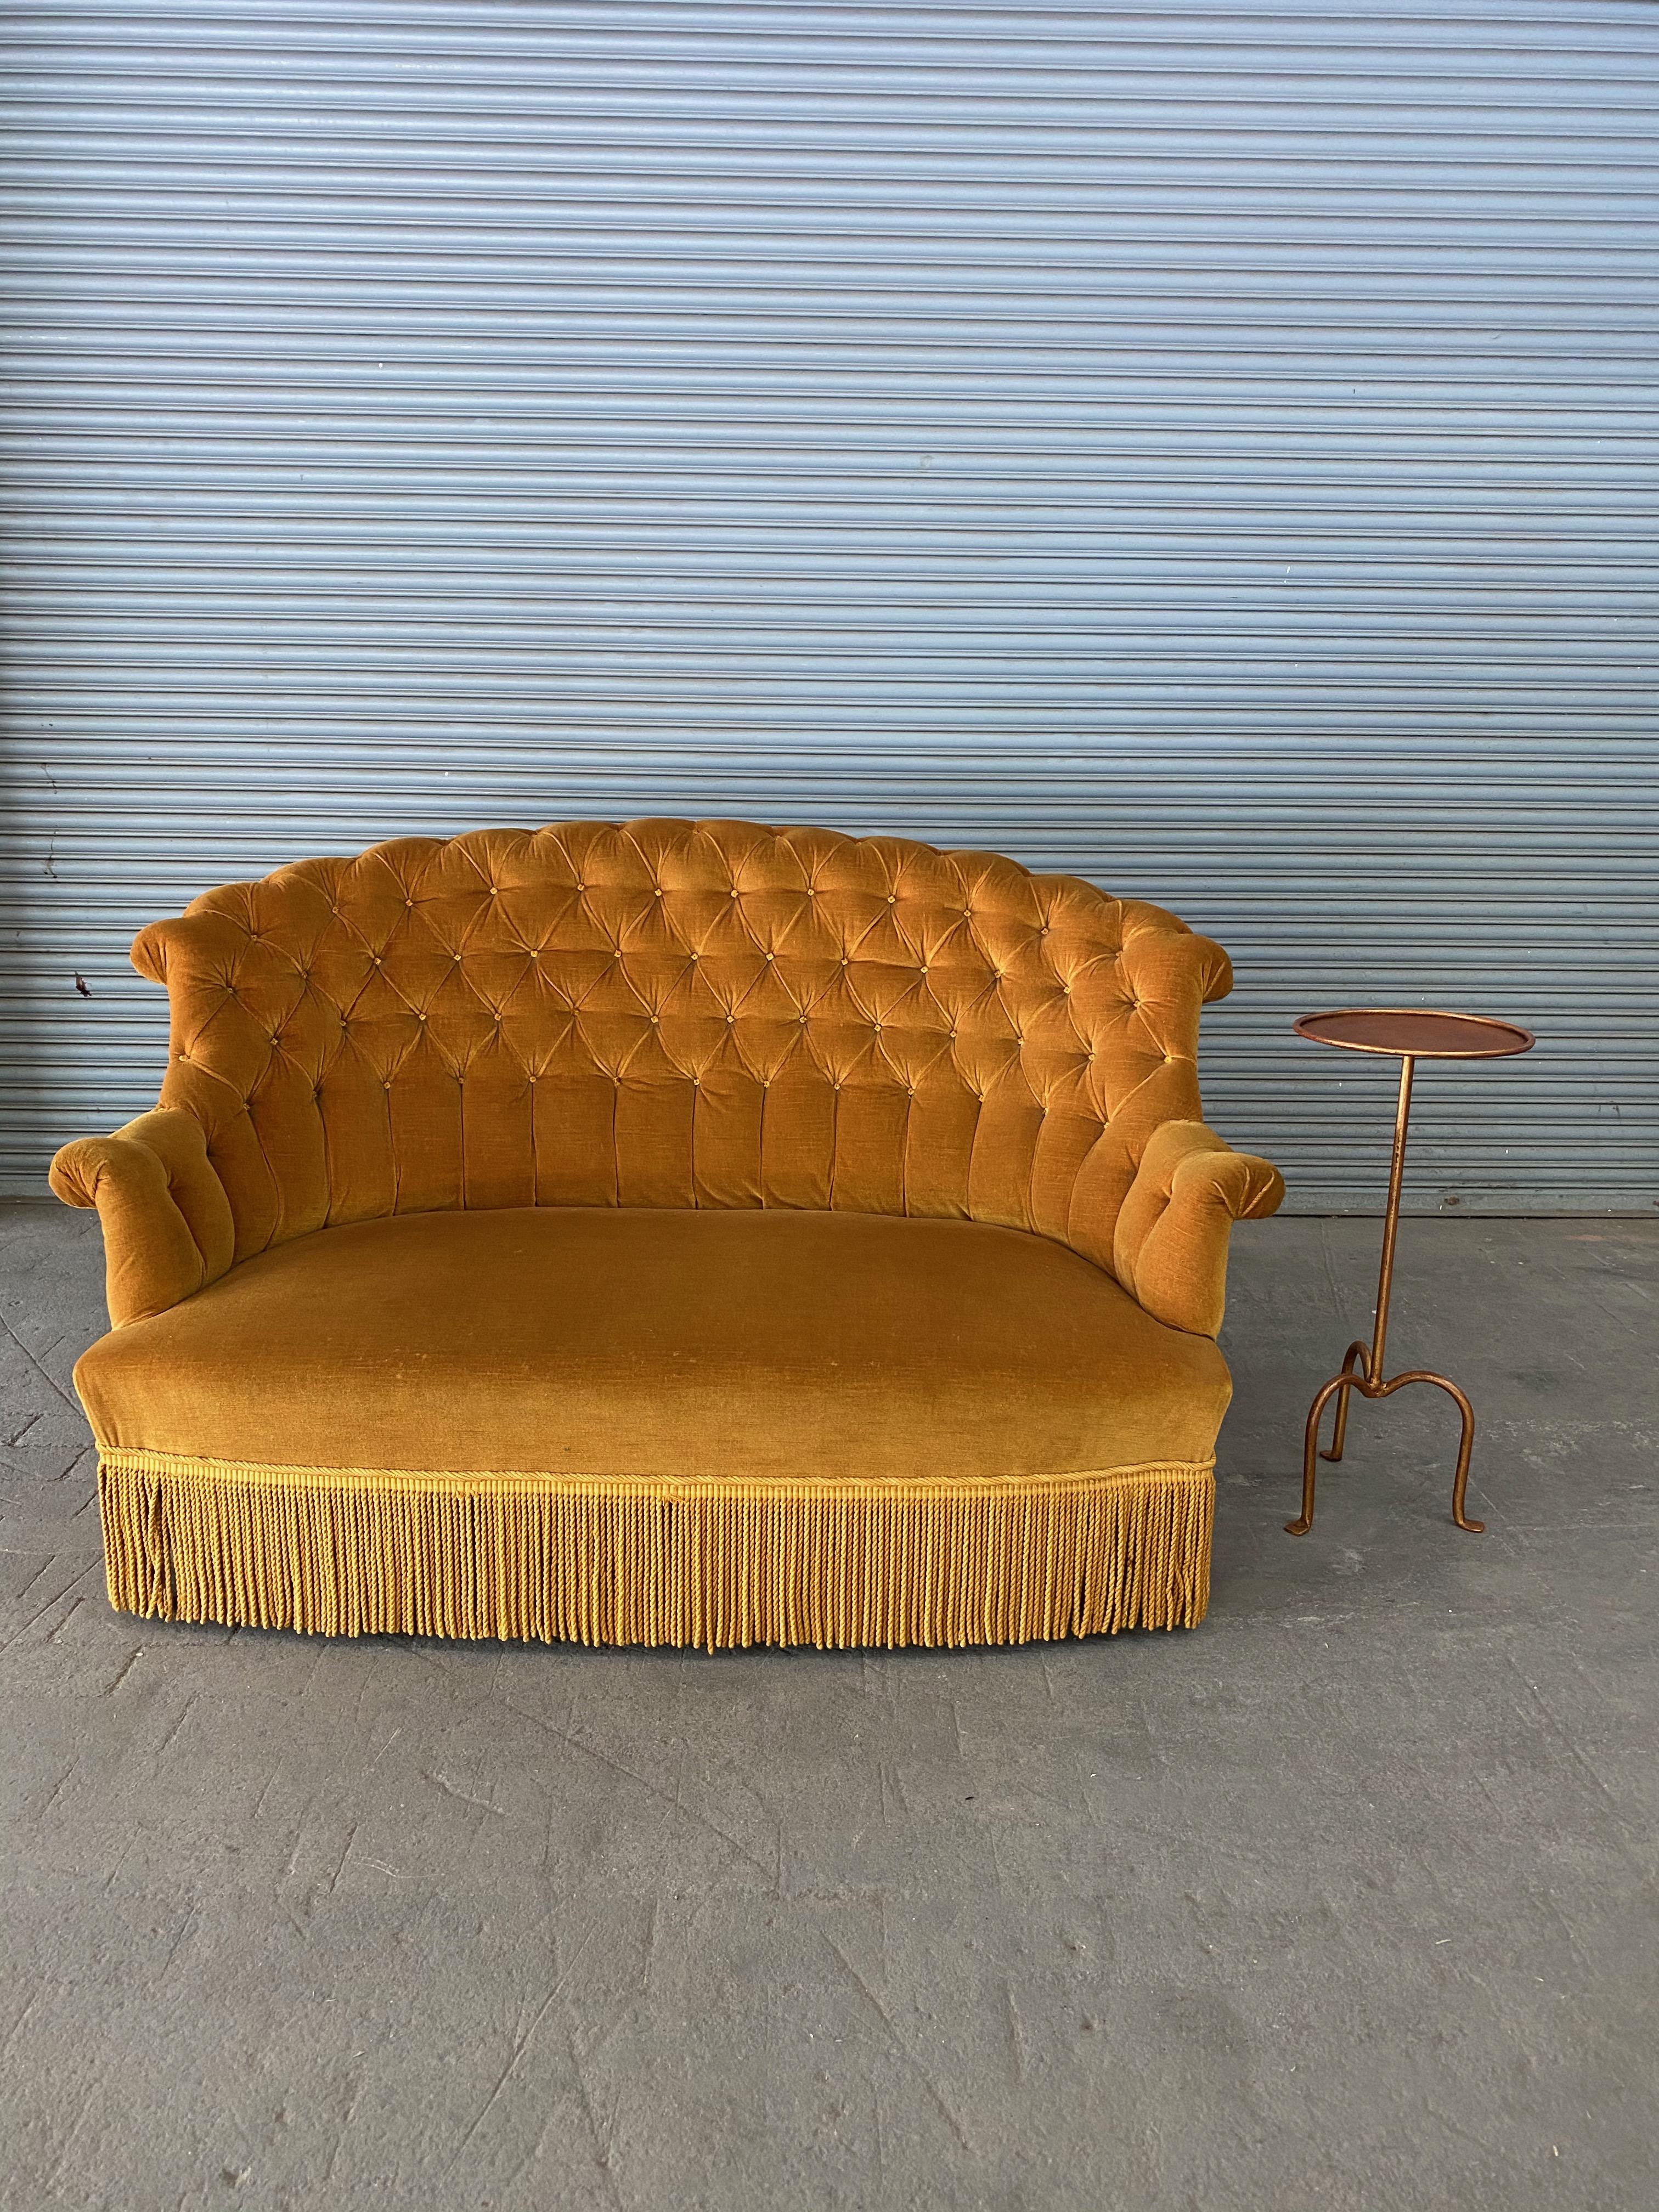 A French 19th century tufted settee upholstered in gold velvet. The settee / loveseat is in very good vintage condition, and while the upholstery is not new, the fabric is clean and can be used. Sold as is.

 